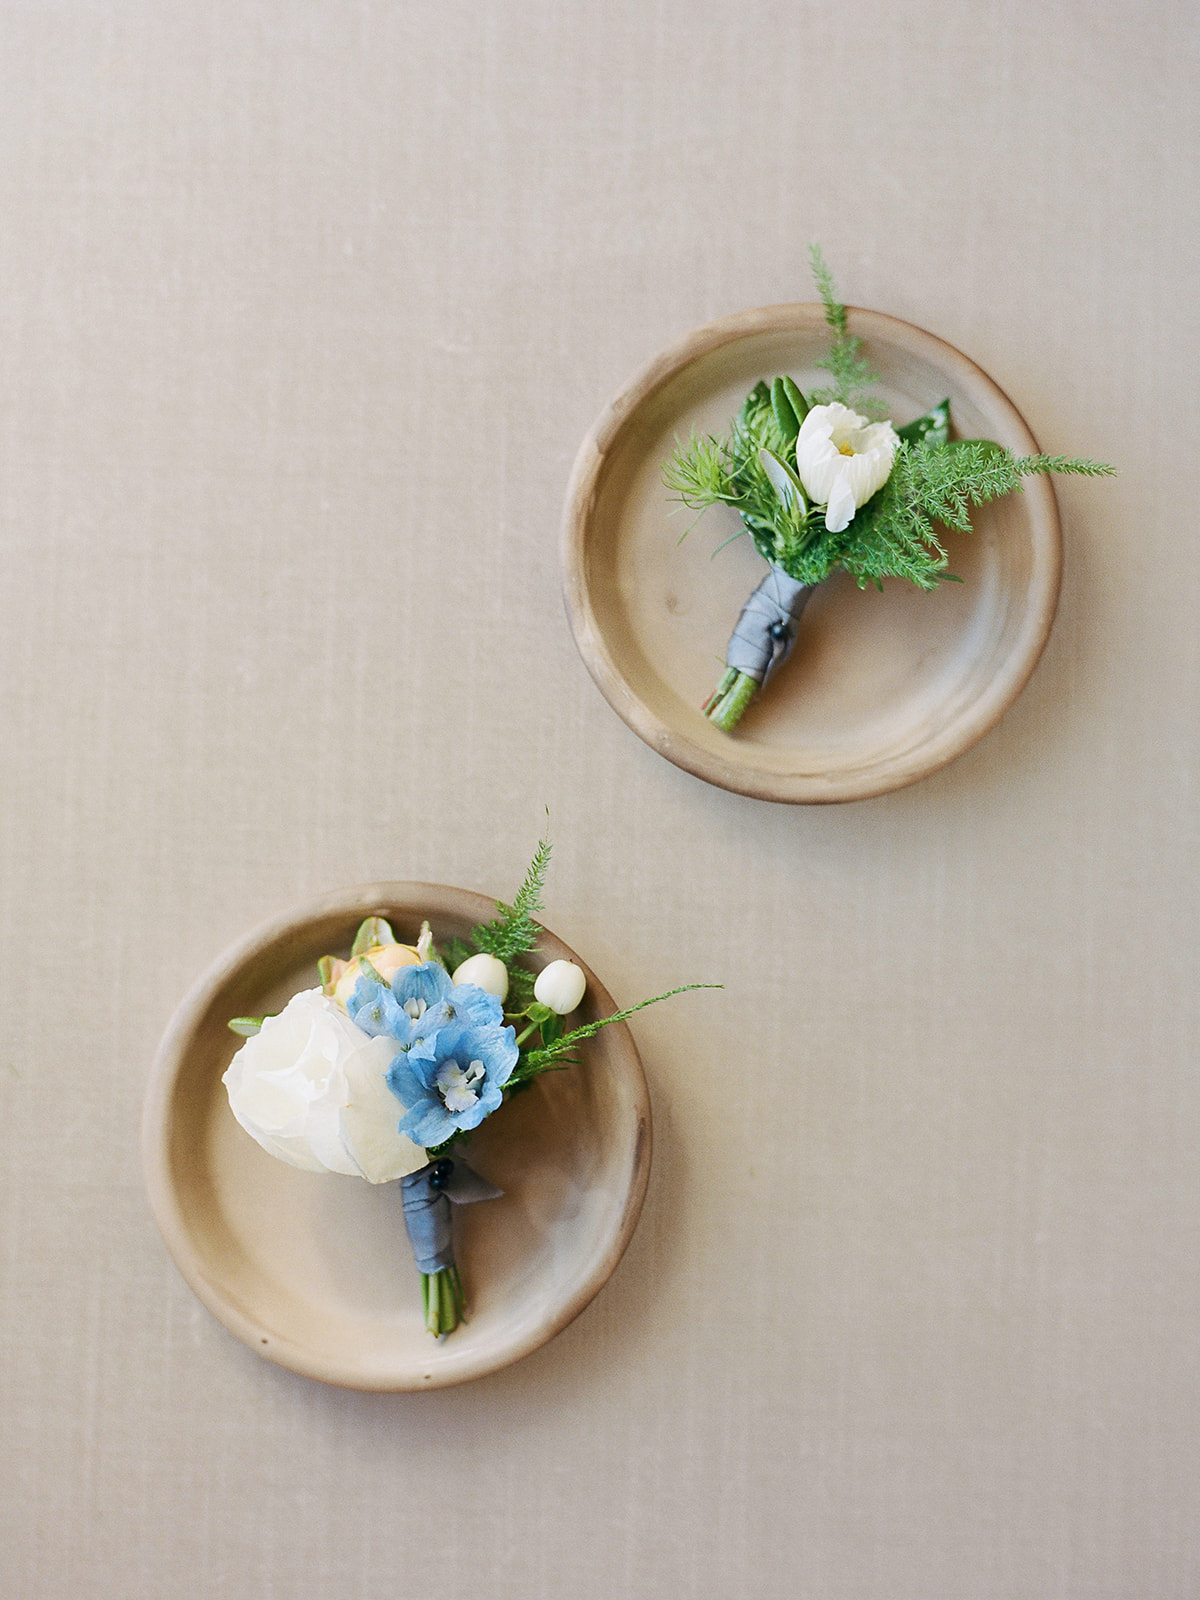 early spring boutonnieres in terra cotta clay dishes